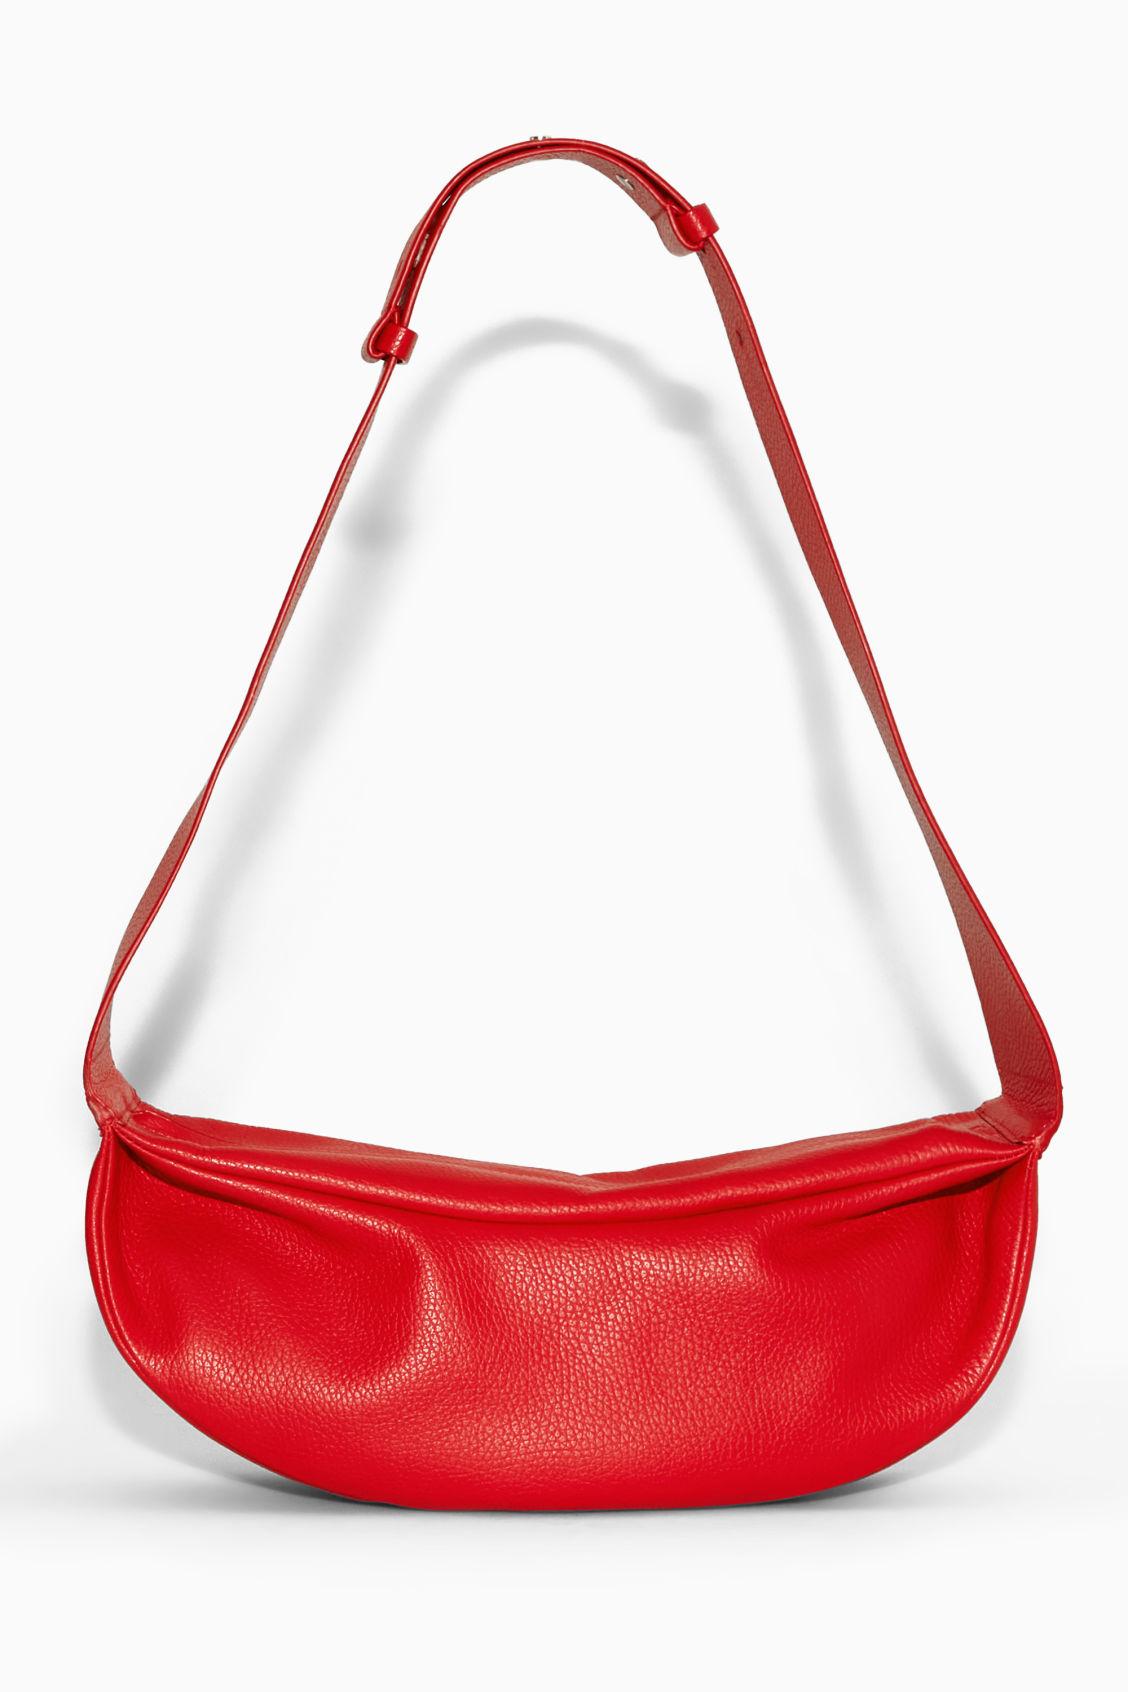 COS Swing Crossbody - Leather in Red